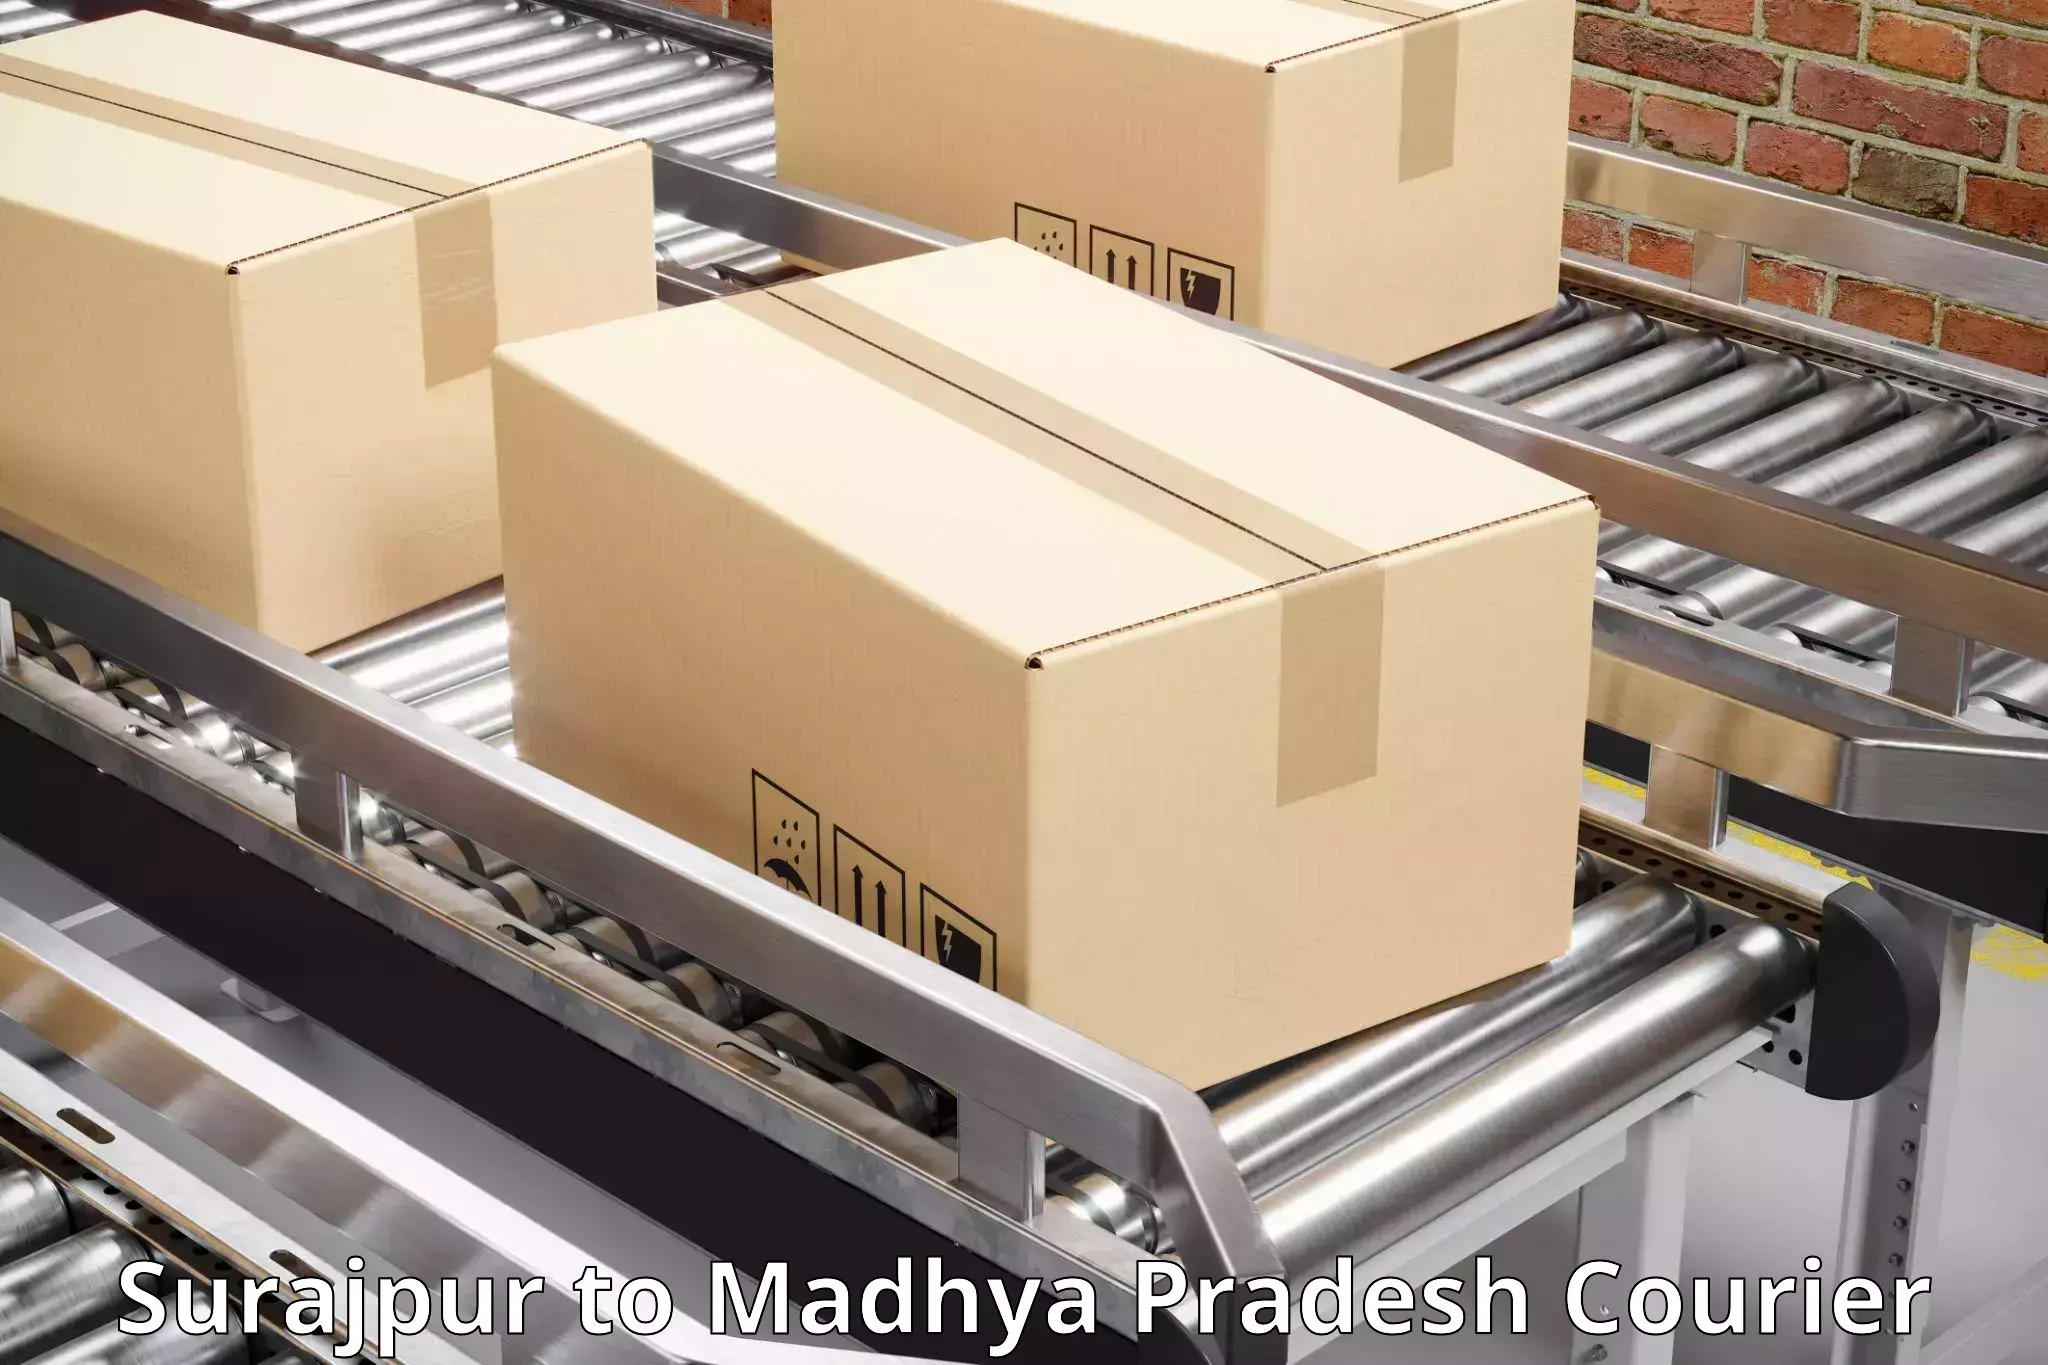 Subscription-based courier Surajpur to Rampur Baghelan